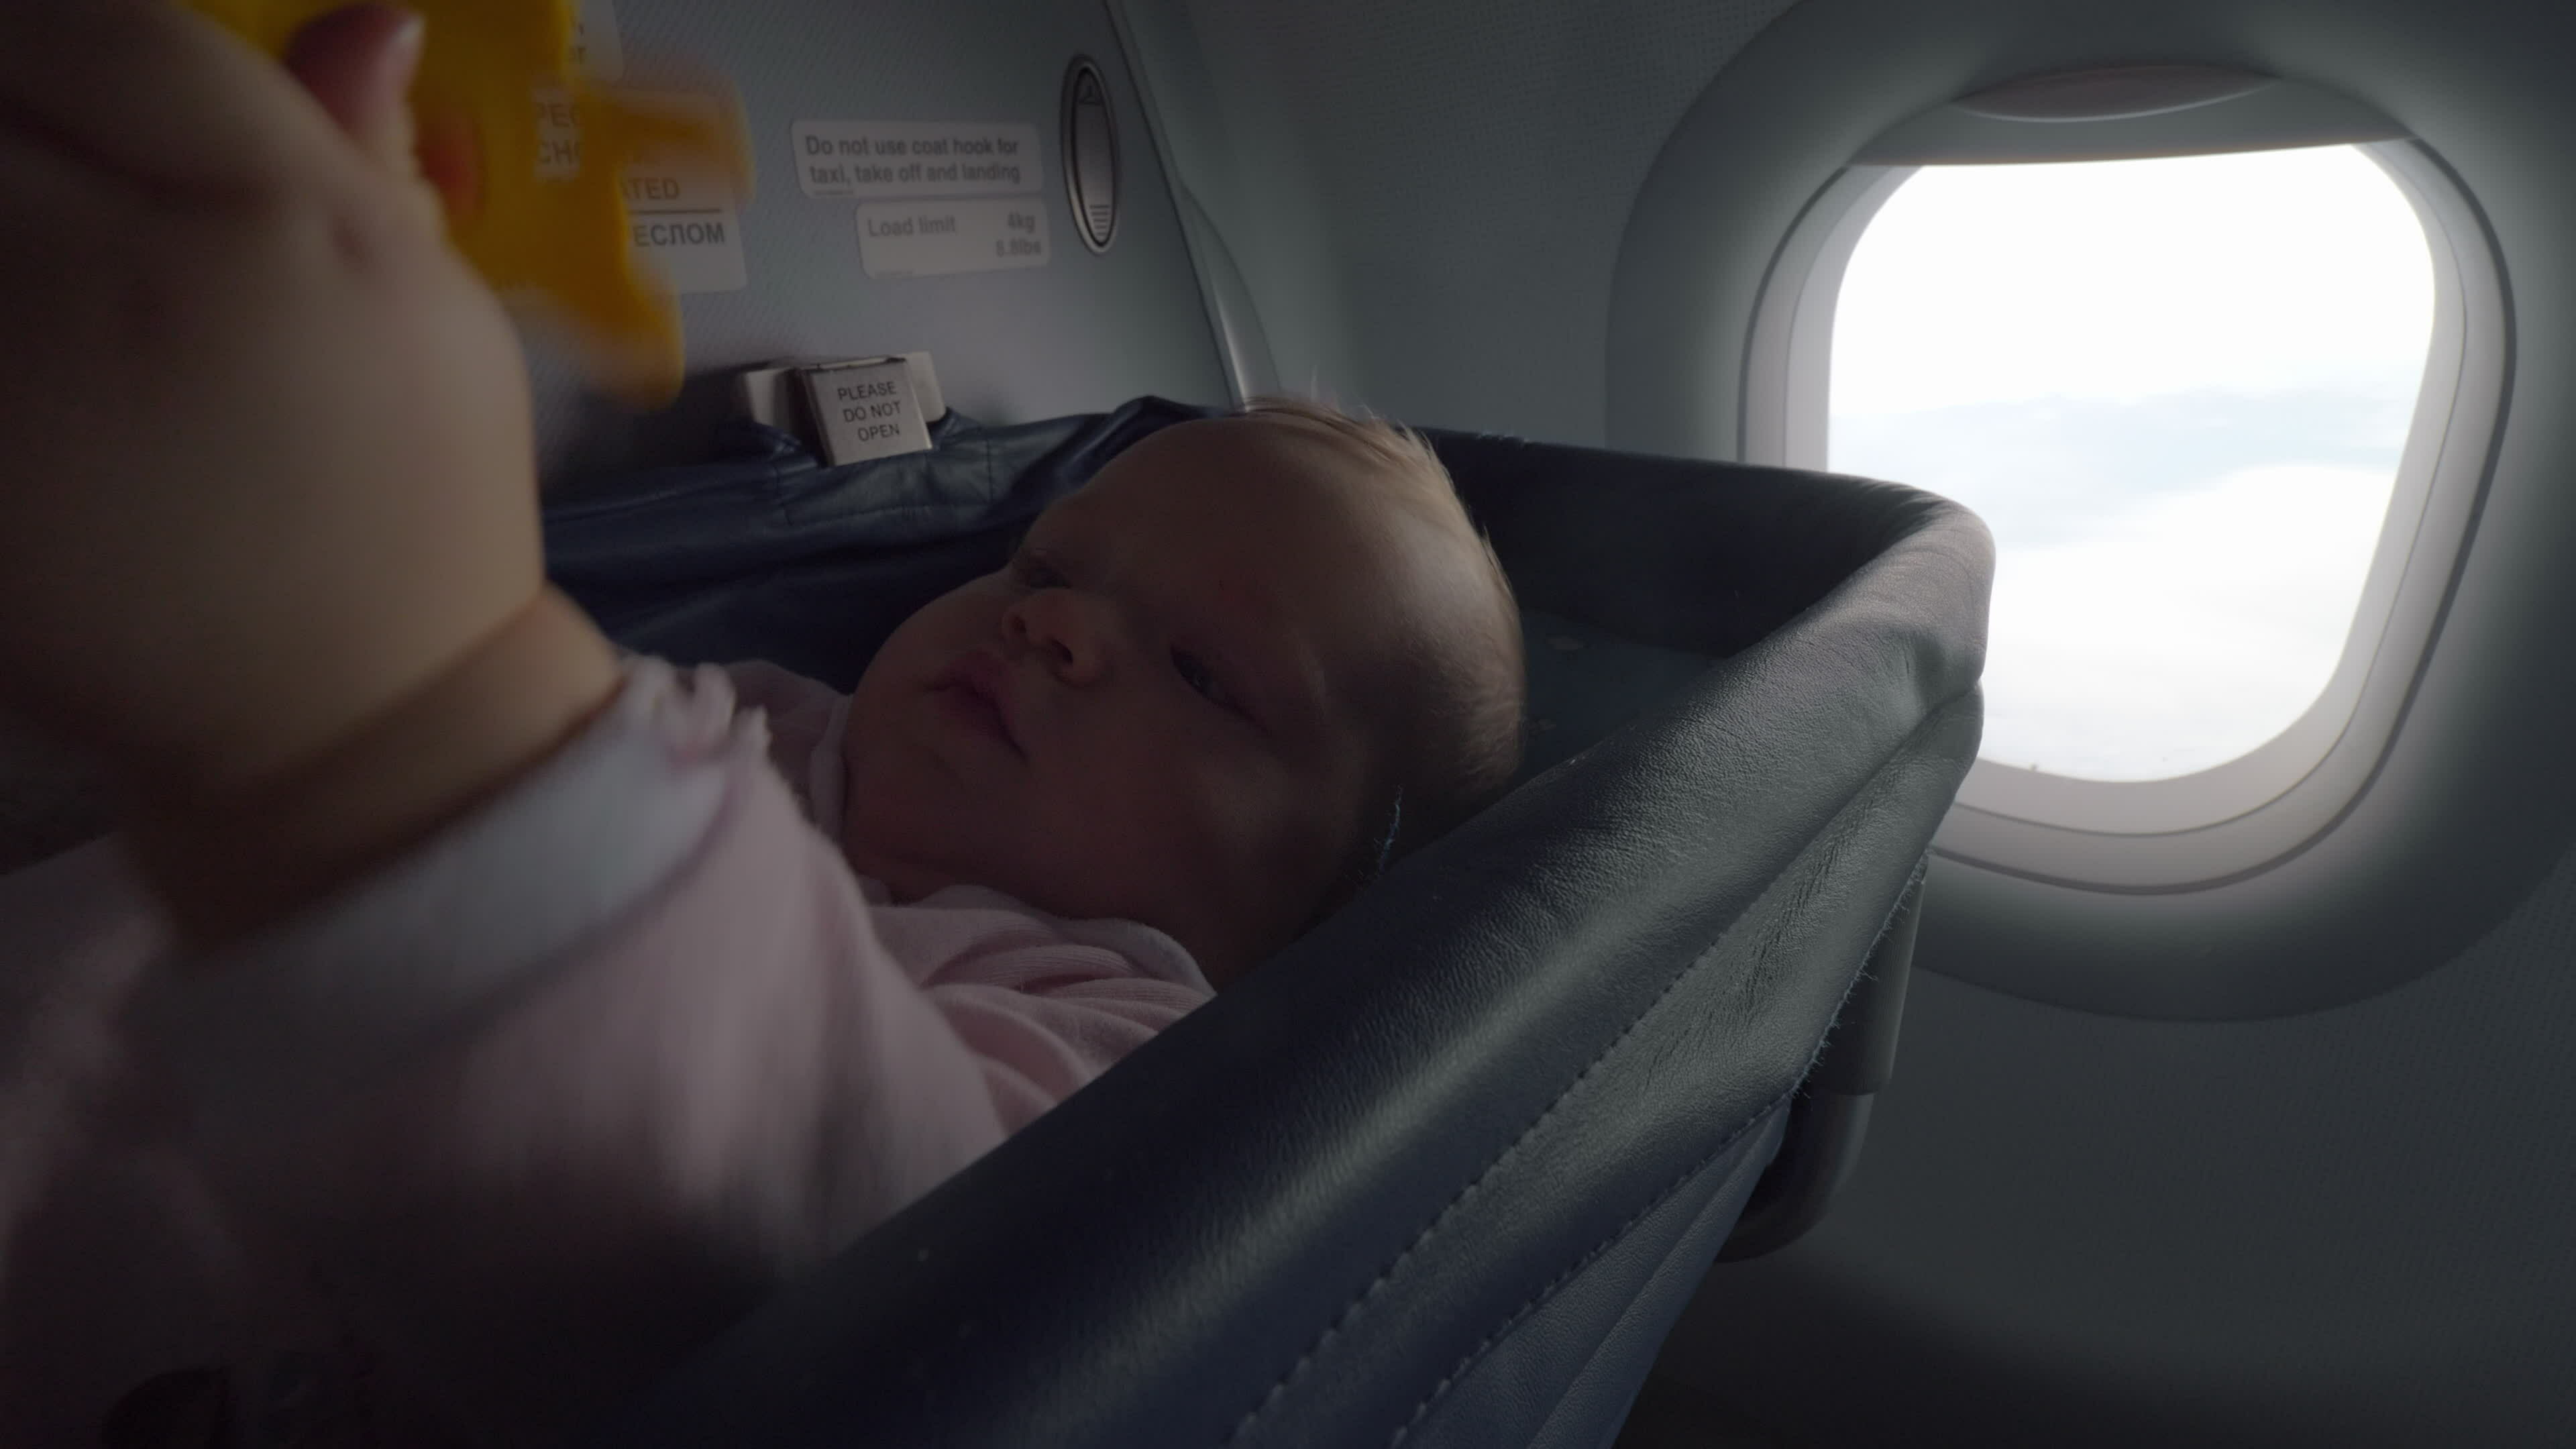 https://static.vecteezy.com/system/resources/thumbnails/030/049/219/original/playful-baby-with-toy-in-special-plane-bassinet-video.jpg